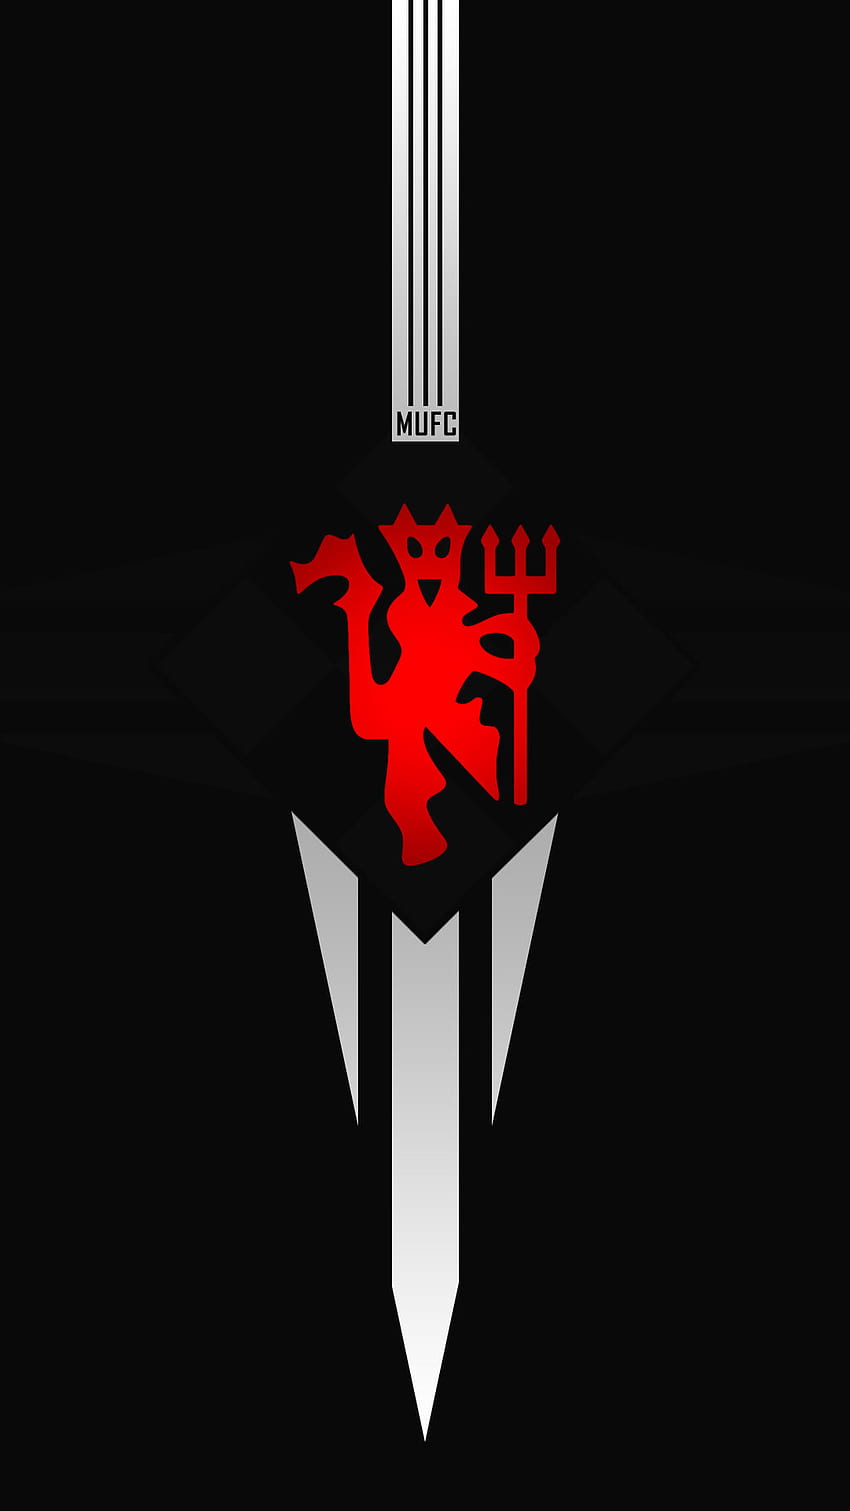 Man United Logo for iPhone and Android mobiles - Man Utd Core, Manchester United HD phone wallpaper